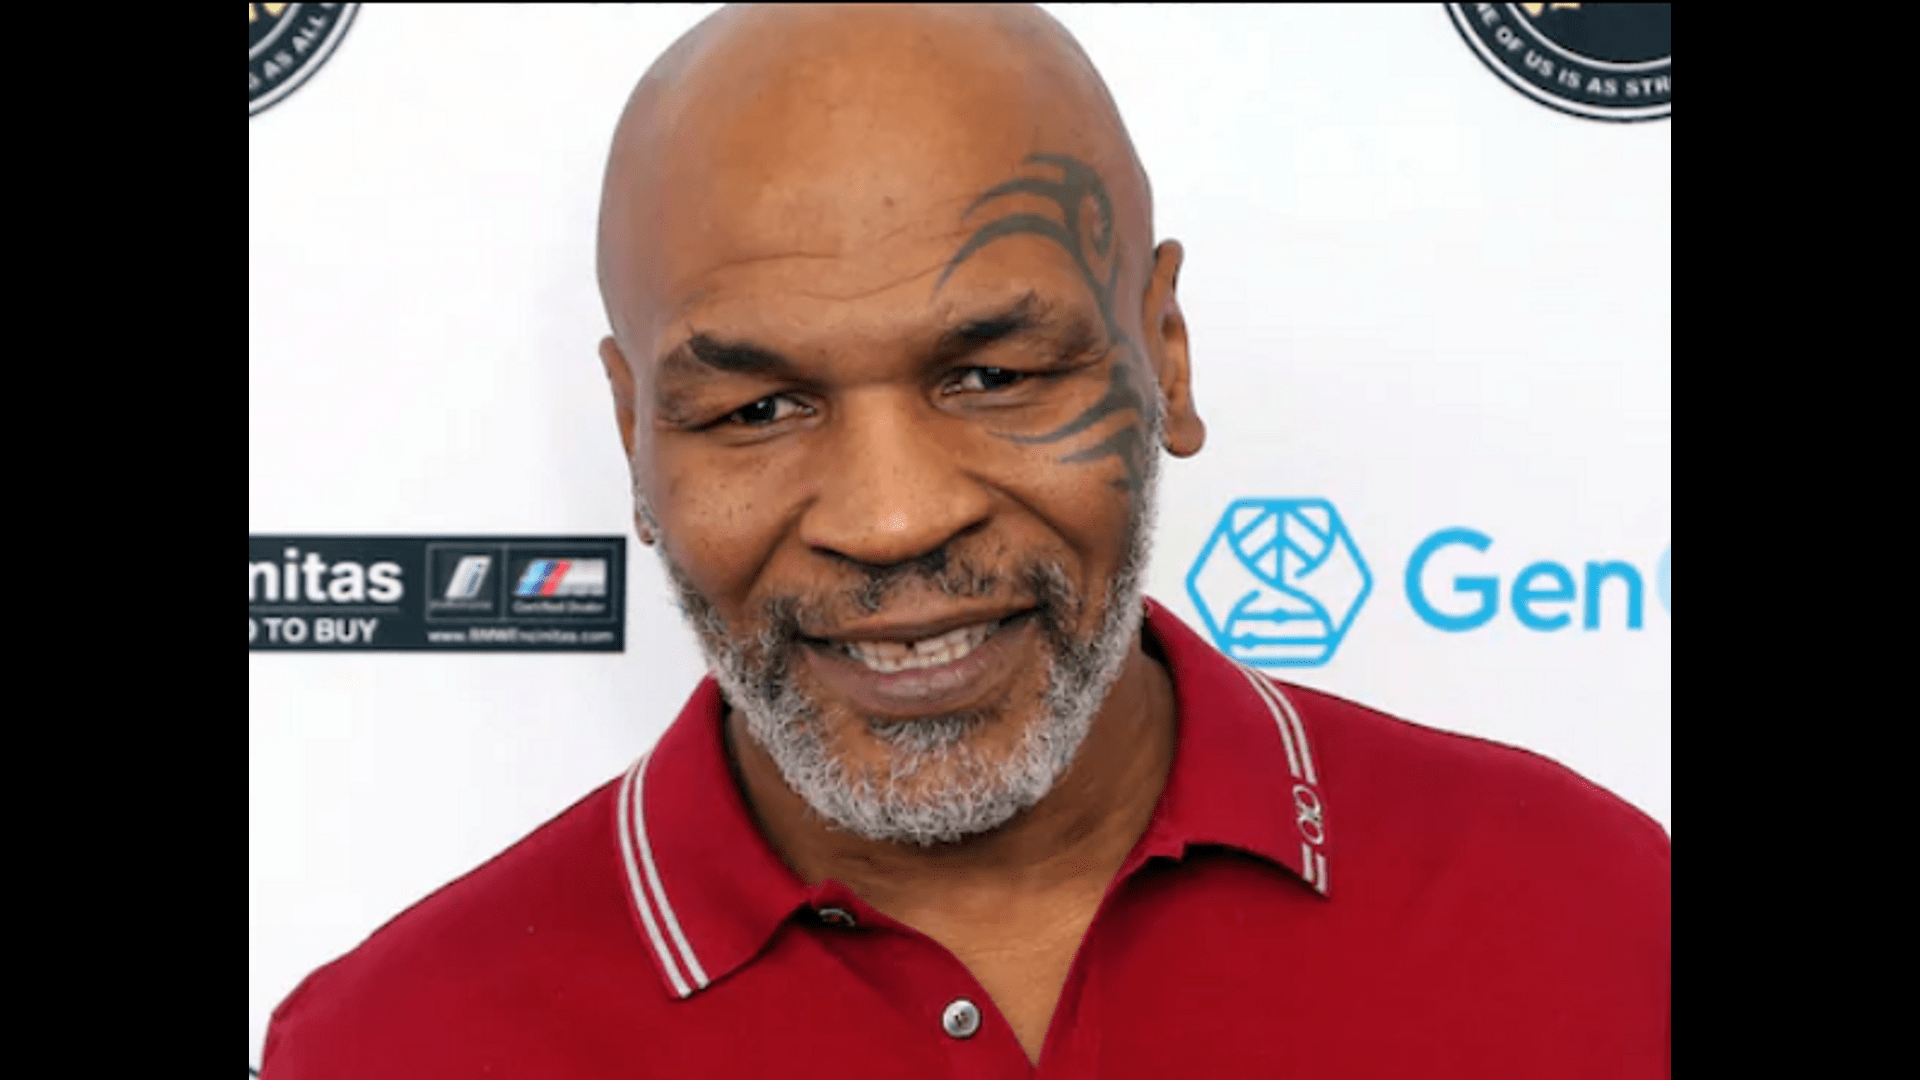 Mike Tyson hit an annoying passenger on the plane